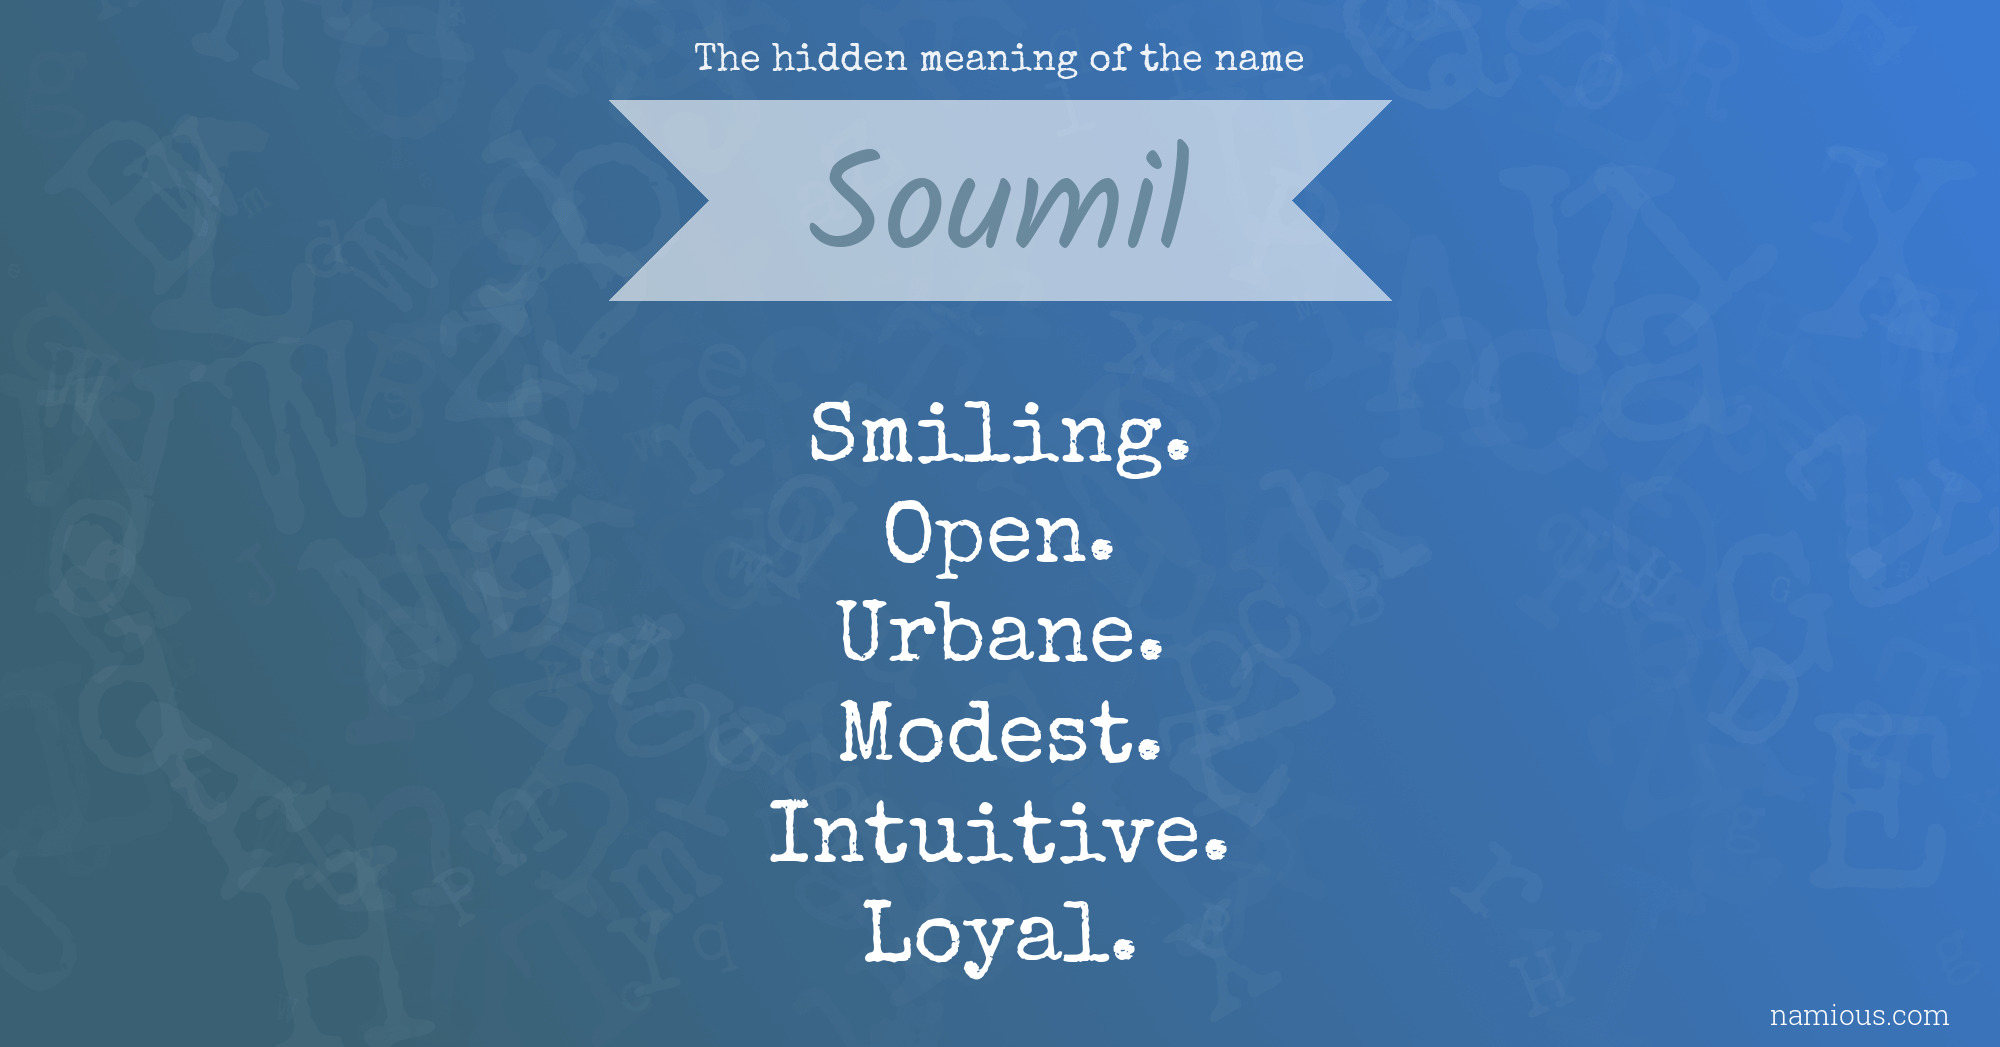 The hidden meaning of the name Soumil